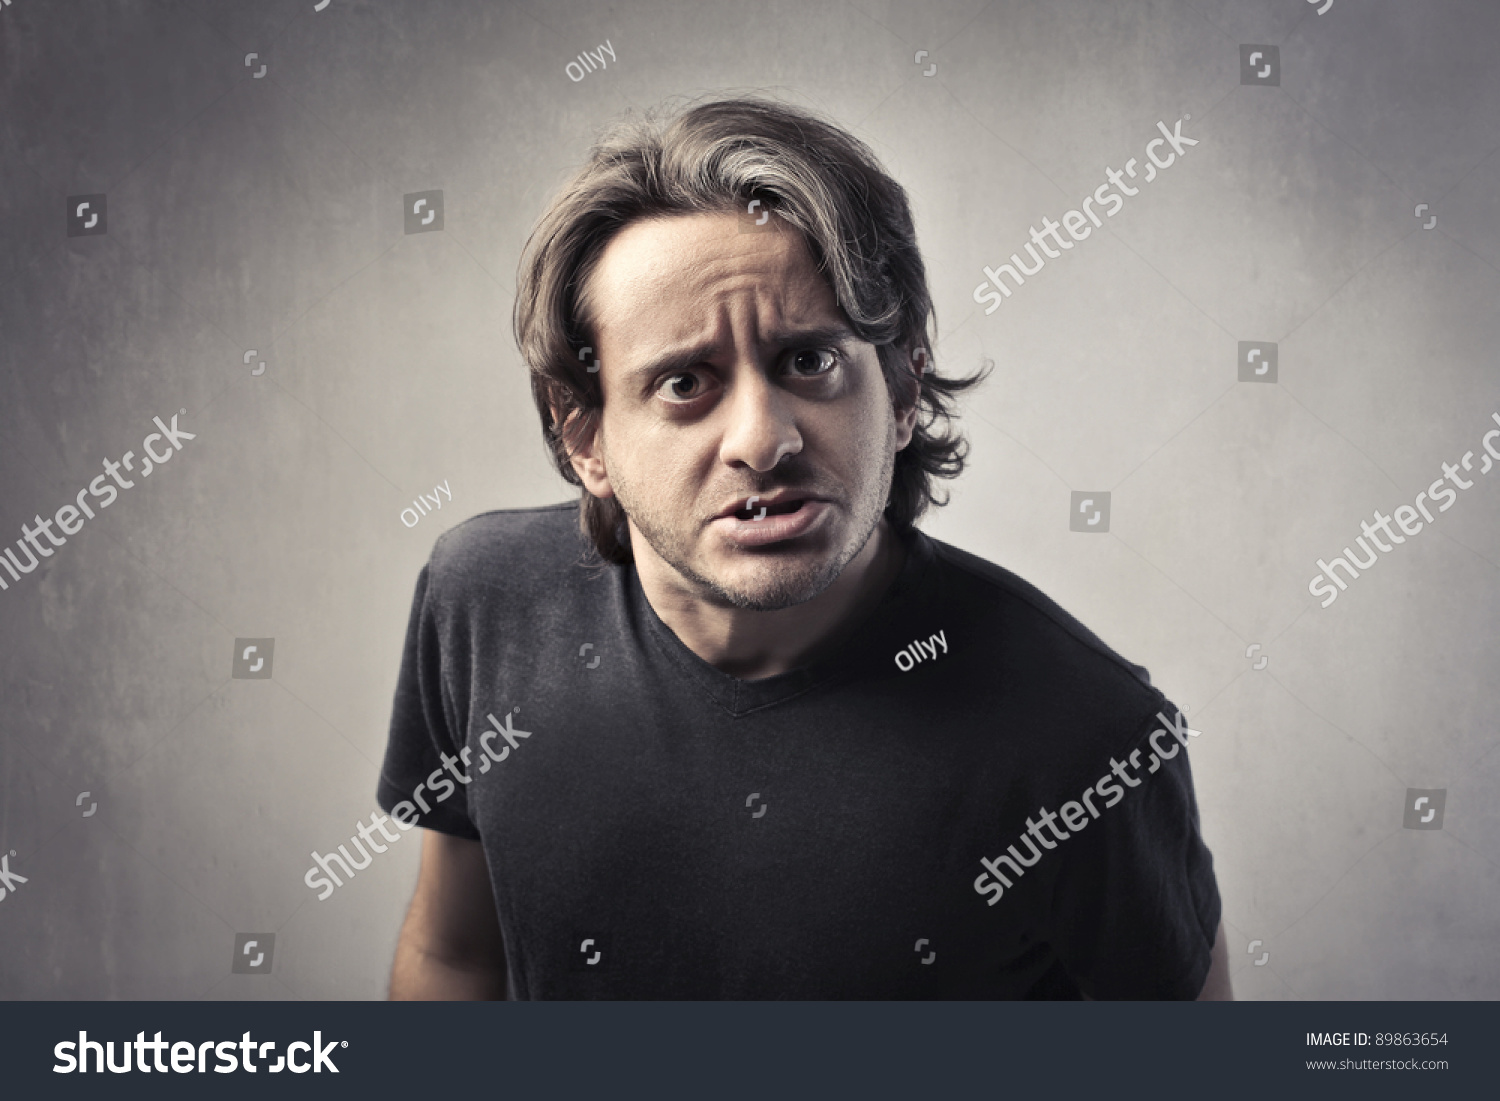 Man With Scared And Doubtful Expression Stock Photo 89863654 : Shutterstock